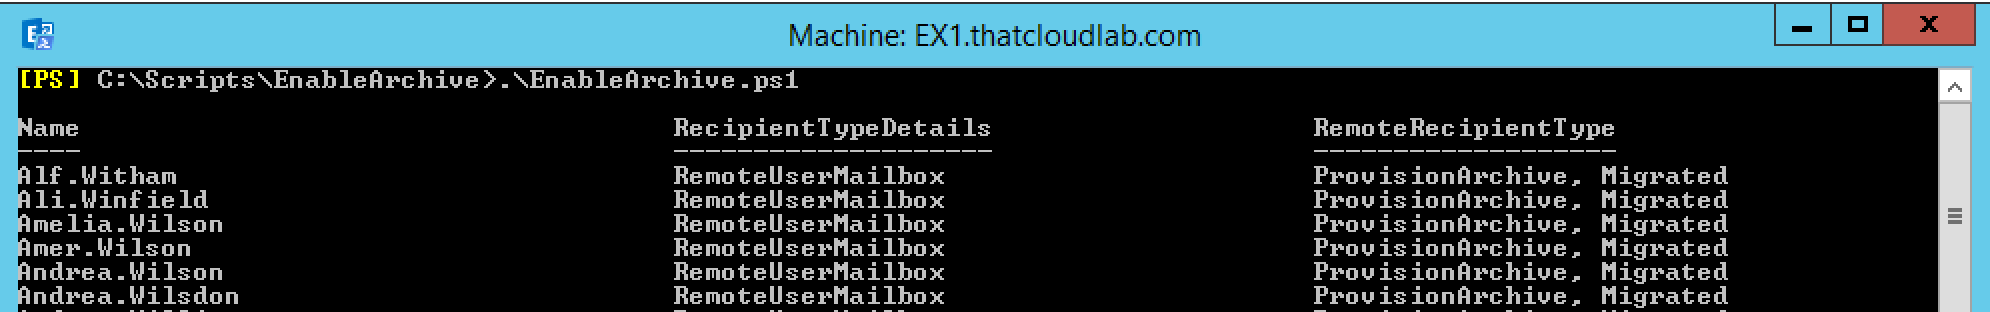 exchange online email archiving